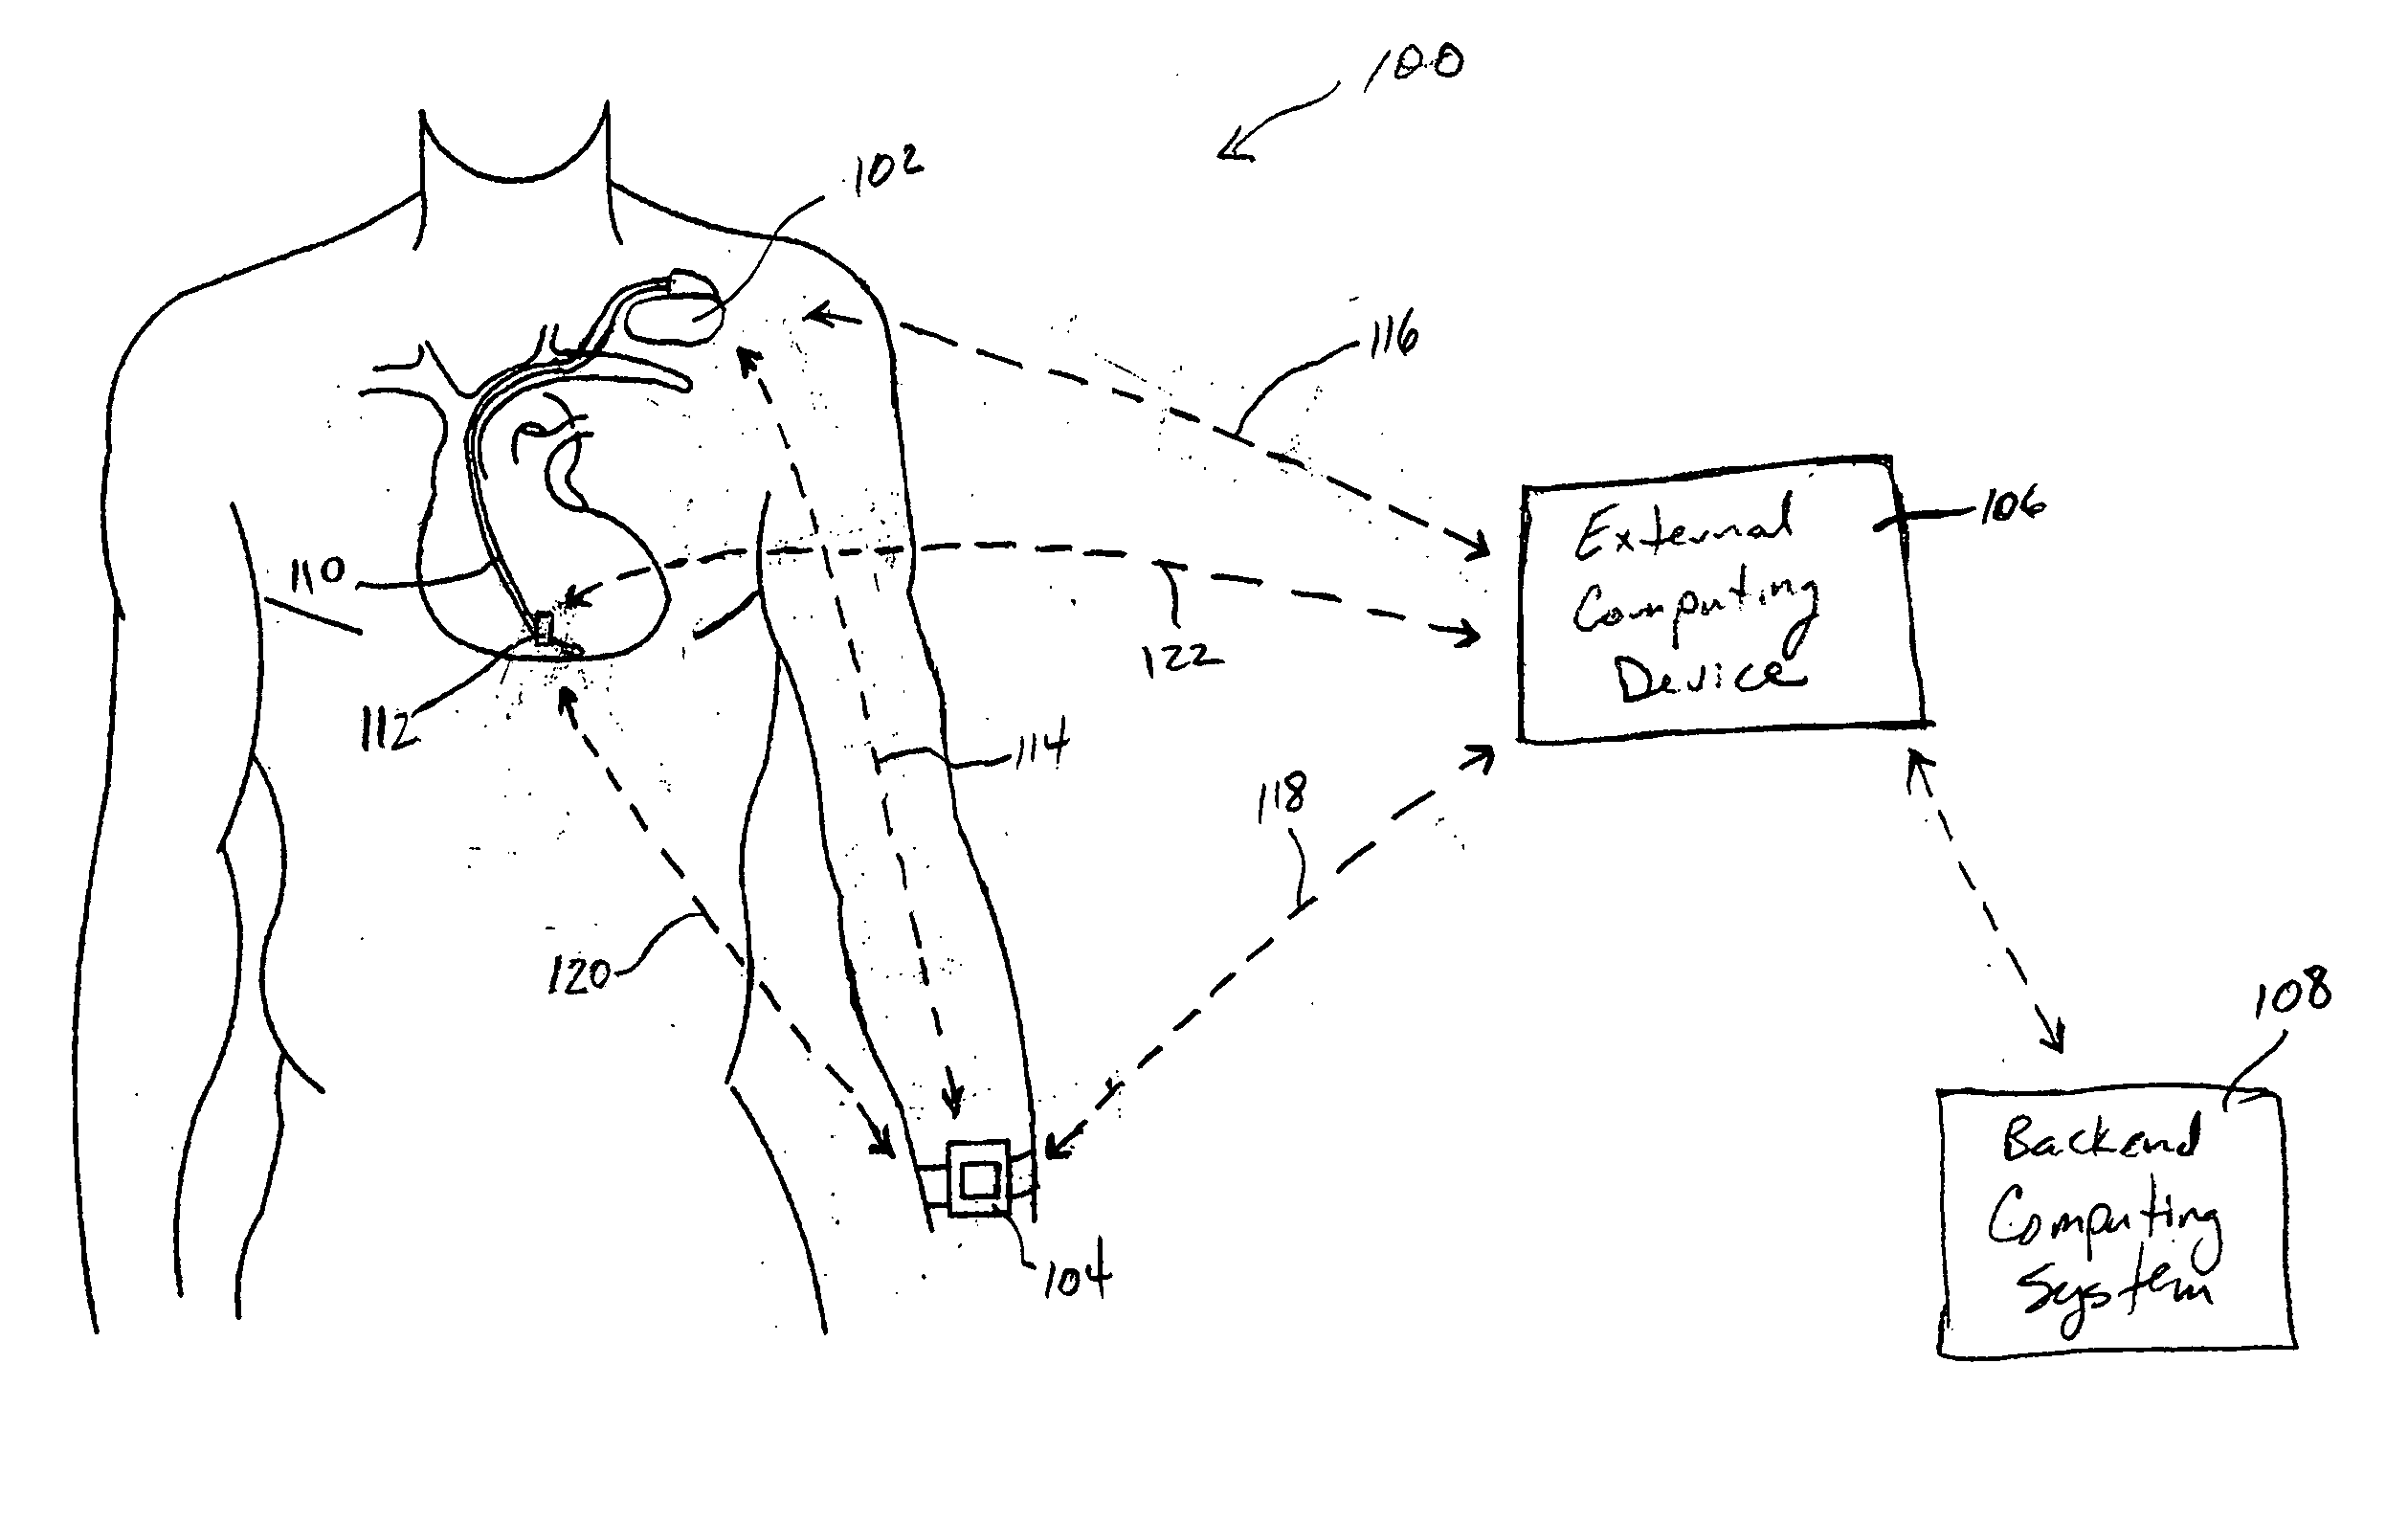 System and method for deriving relative physiologic measurements using an external computing device